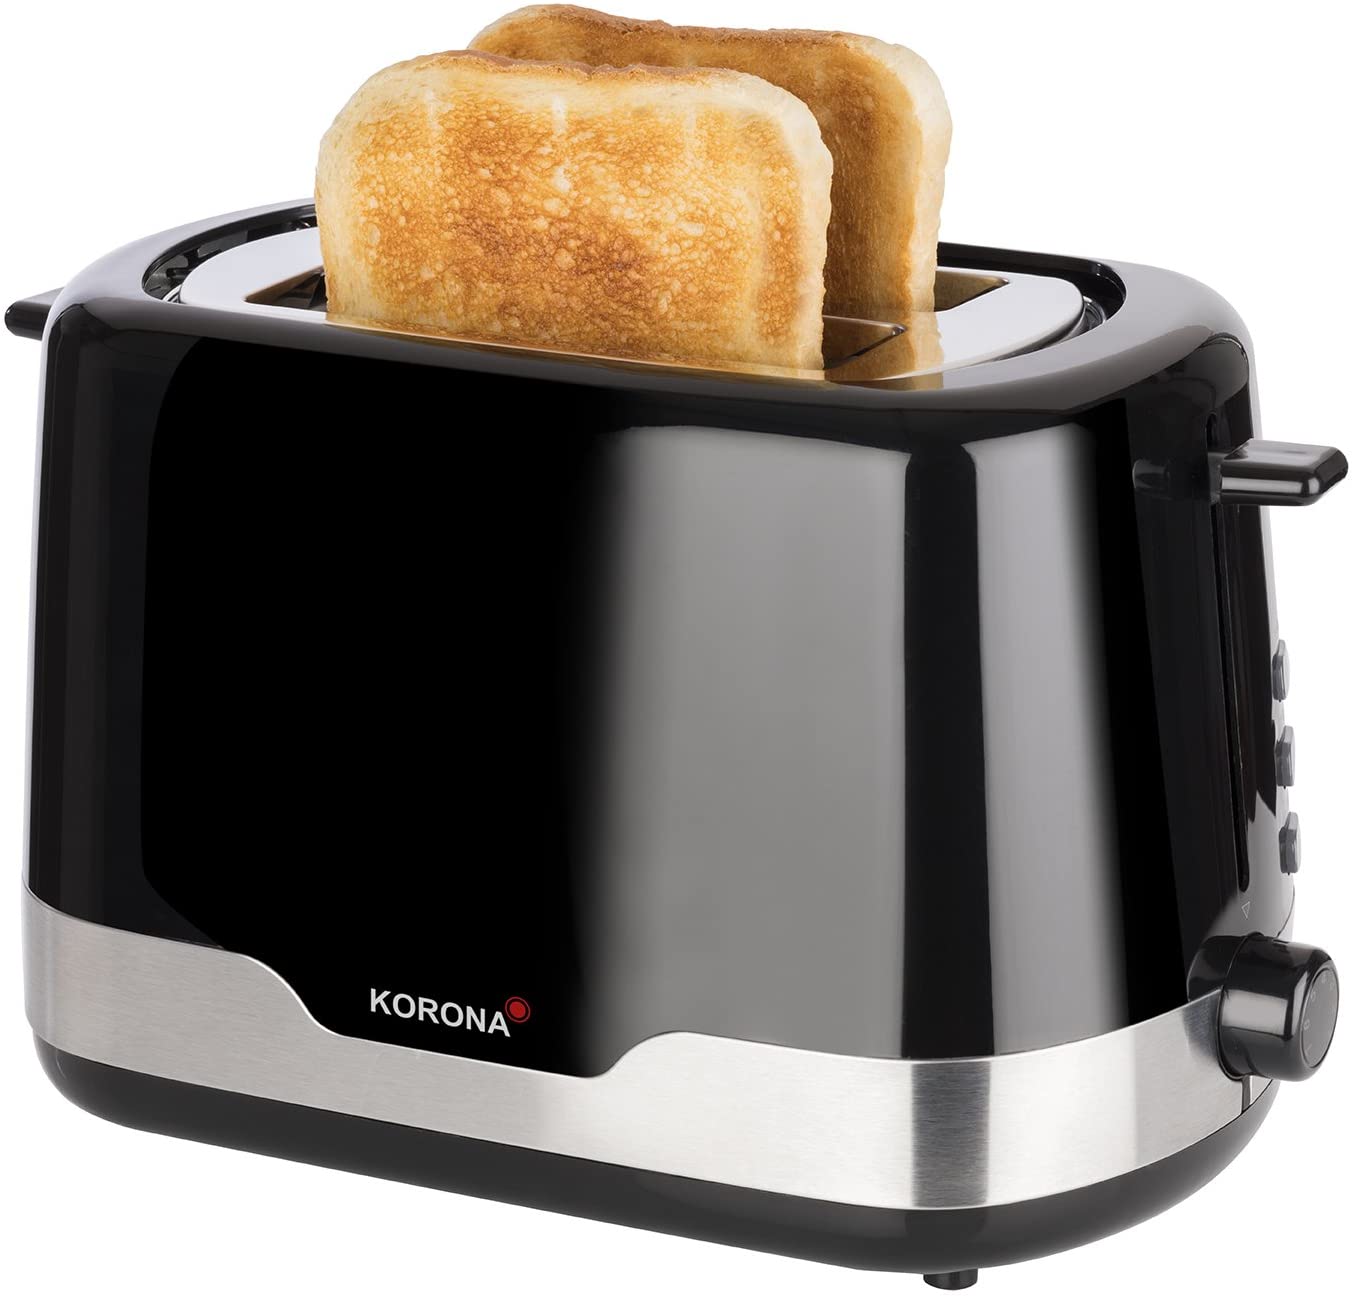 Korona 21232 Stainless Steel Toaster | Black | 2 Slice Toaster with Bun Attachment | Defrosting and Warming Level